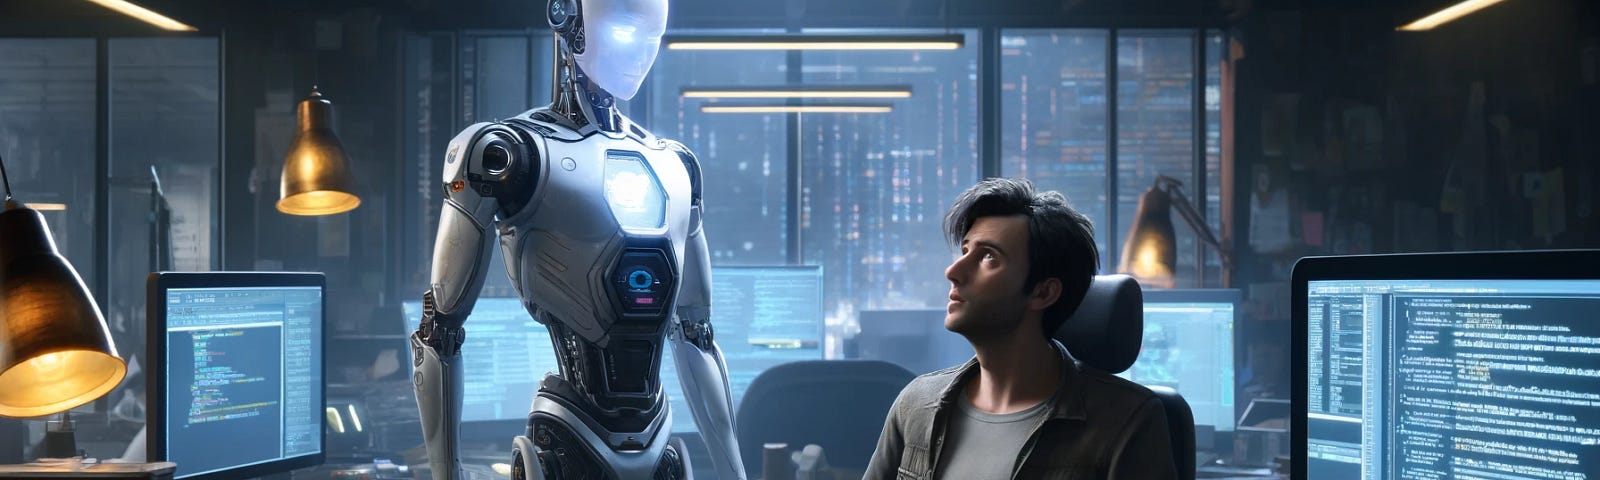 Futuristic office scene with a humanoid robot, ARTIE, confronting a bewildered man, Jeff, amidst tech clutter. Tension fills the air, highlighted by the glow from screens.